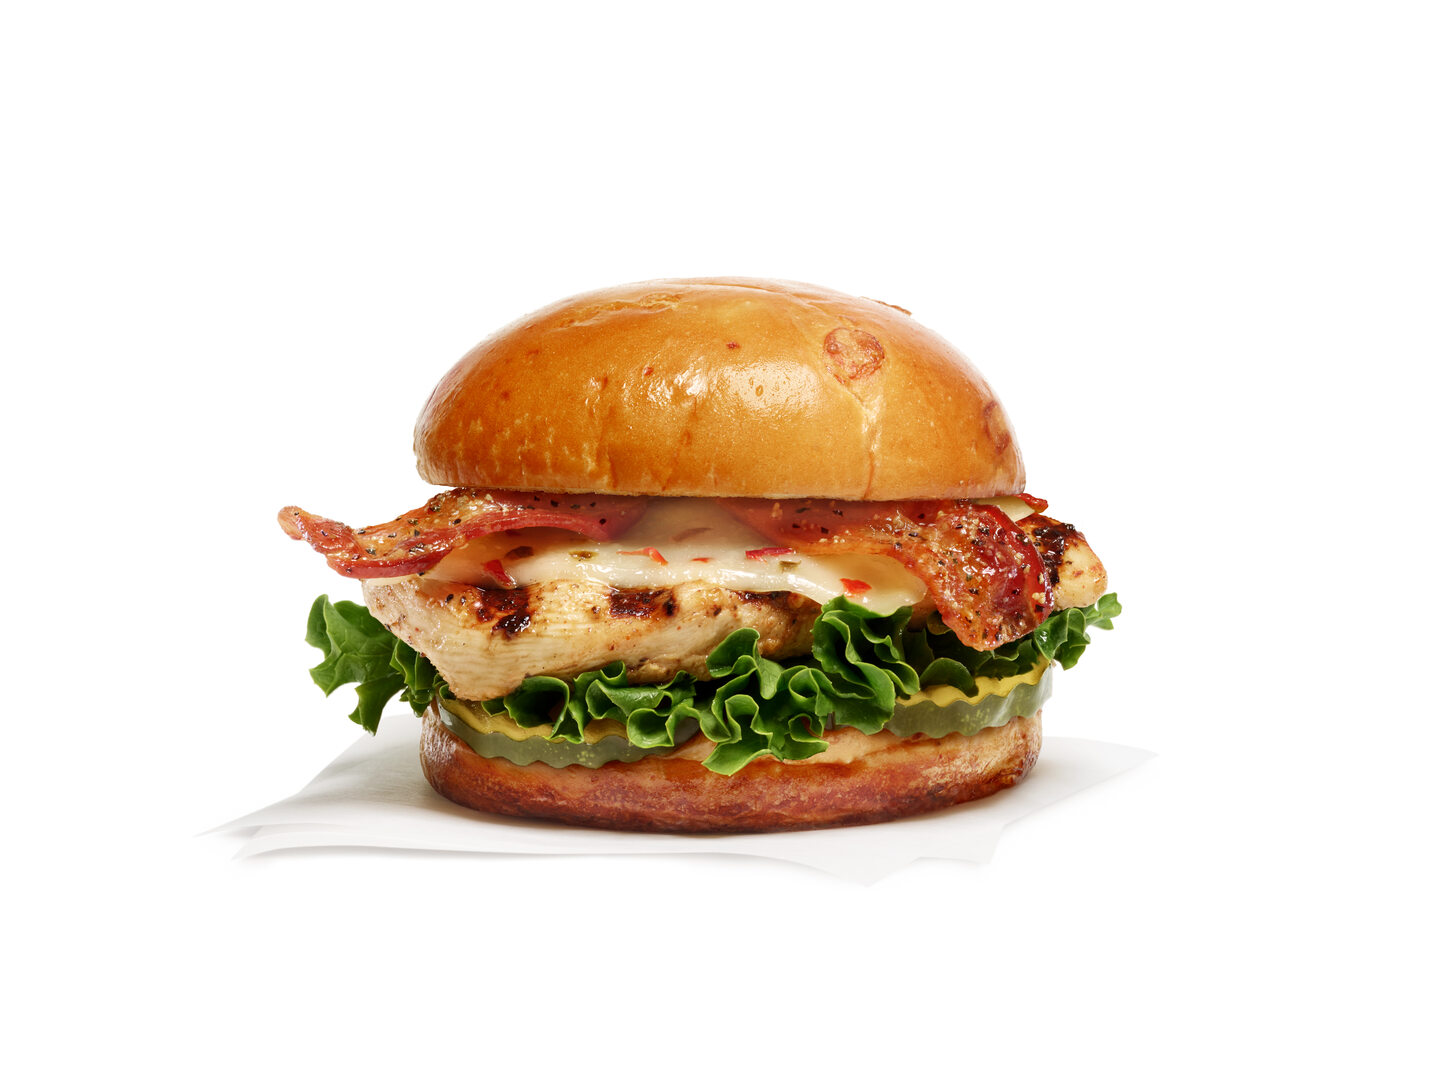 The new Chick-fil-A Maple Pepper Bacon Sandwich on a plain white background.